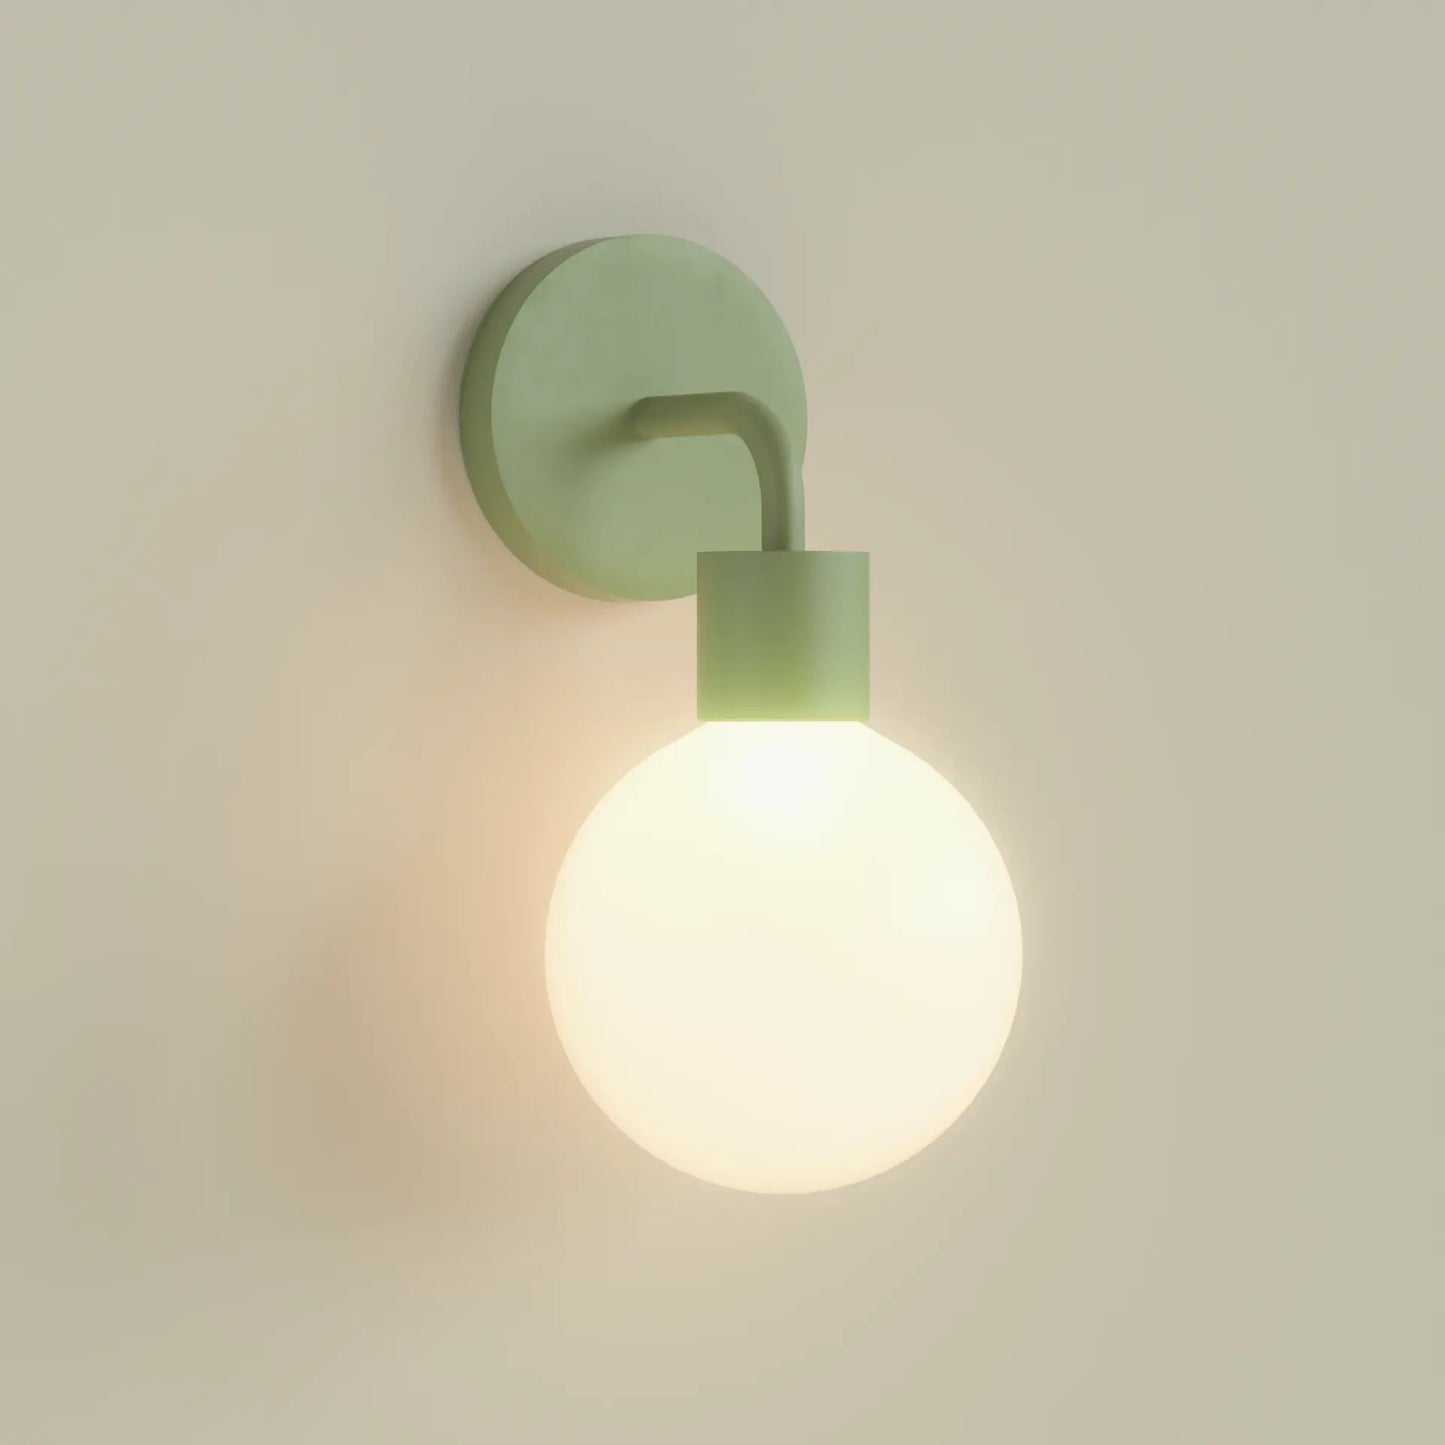 Sage Green Poplight: easy to install wall lighting designed for renters